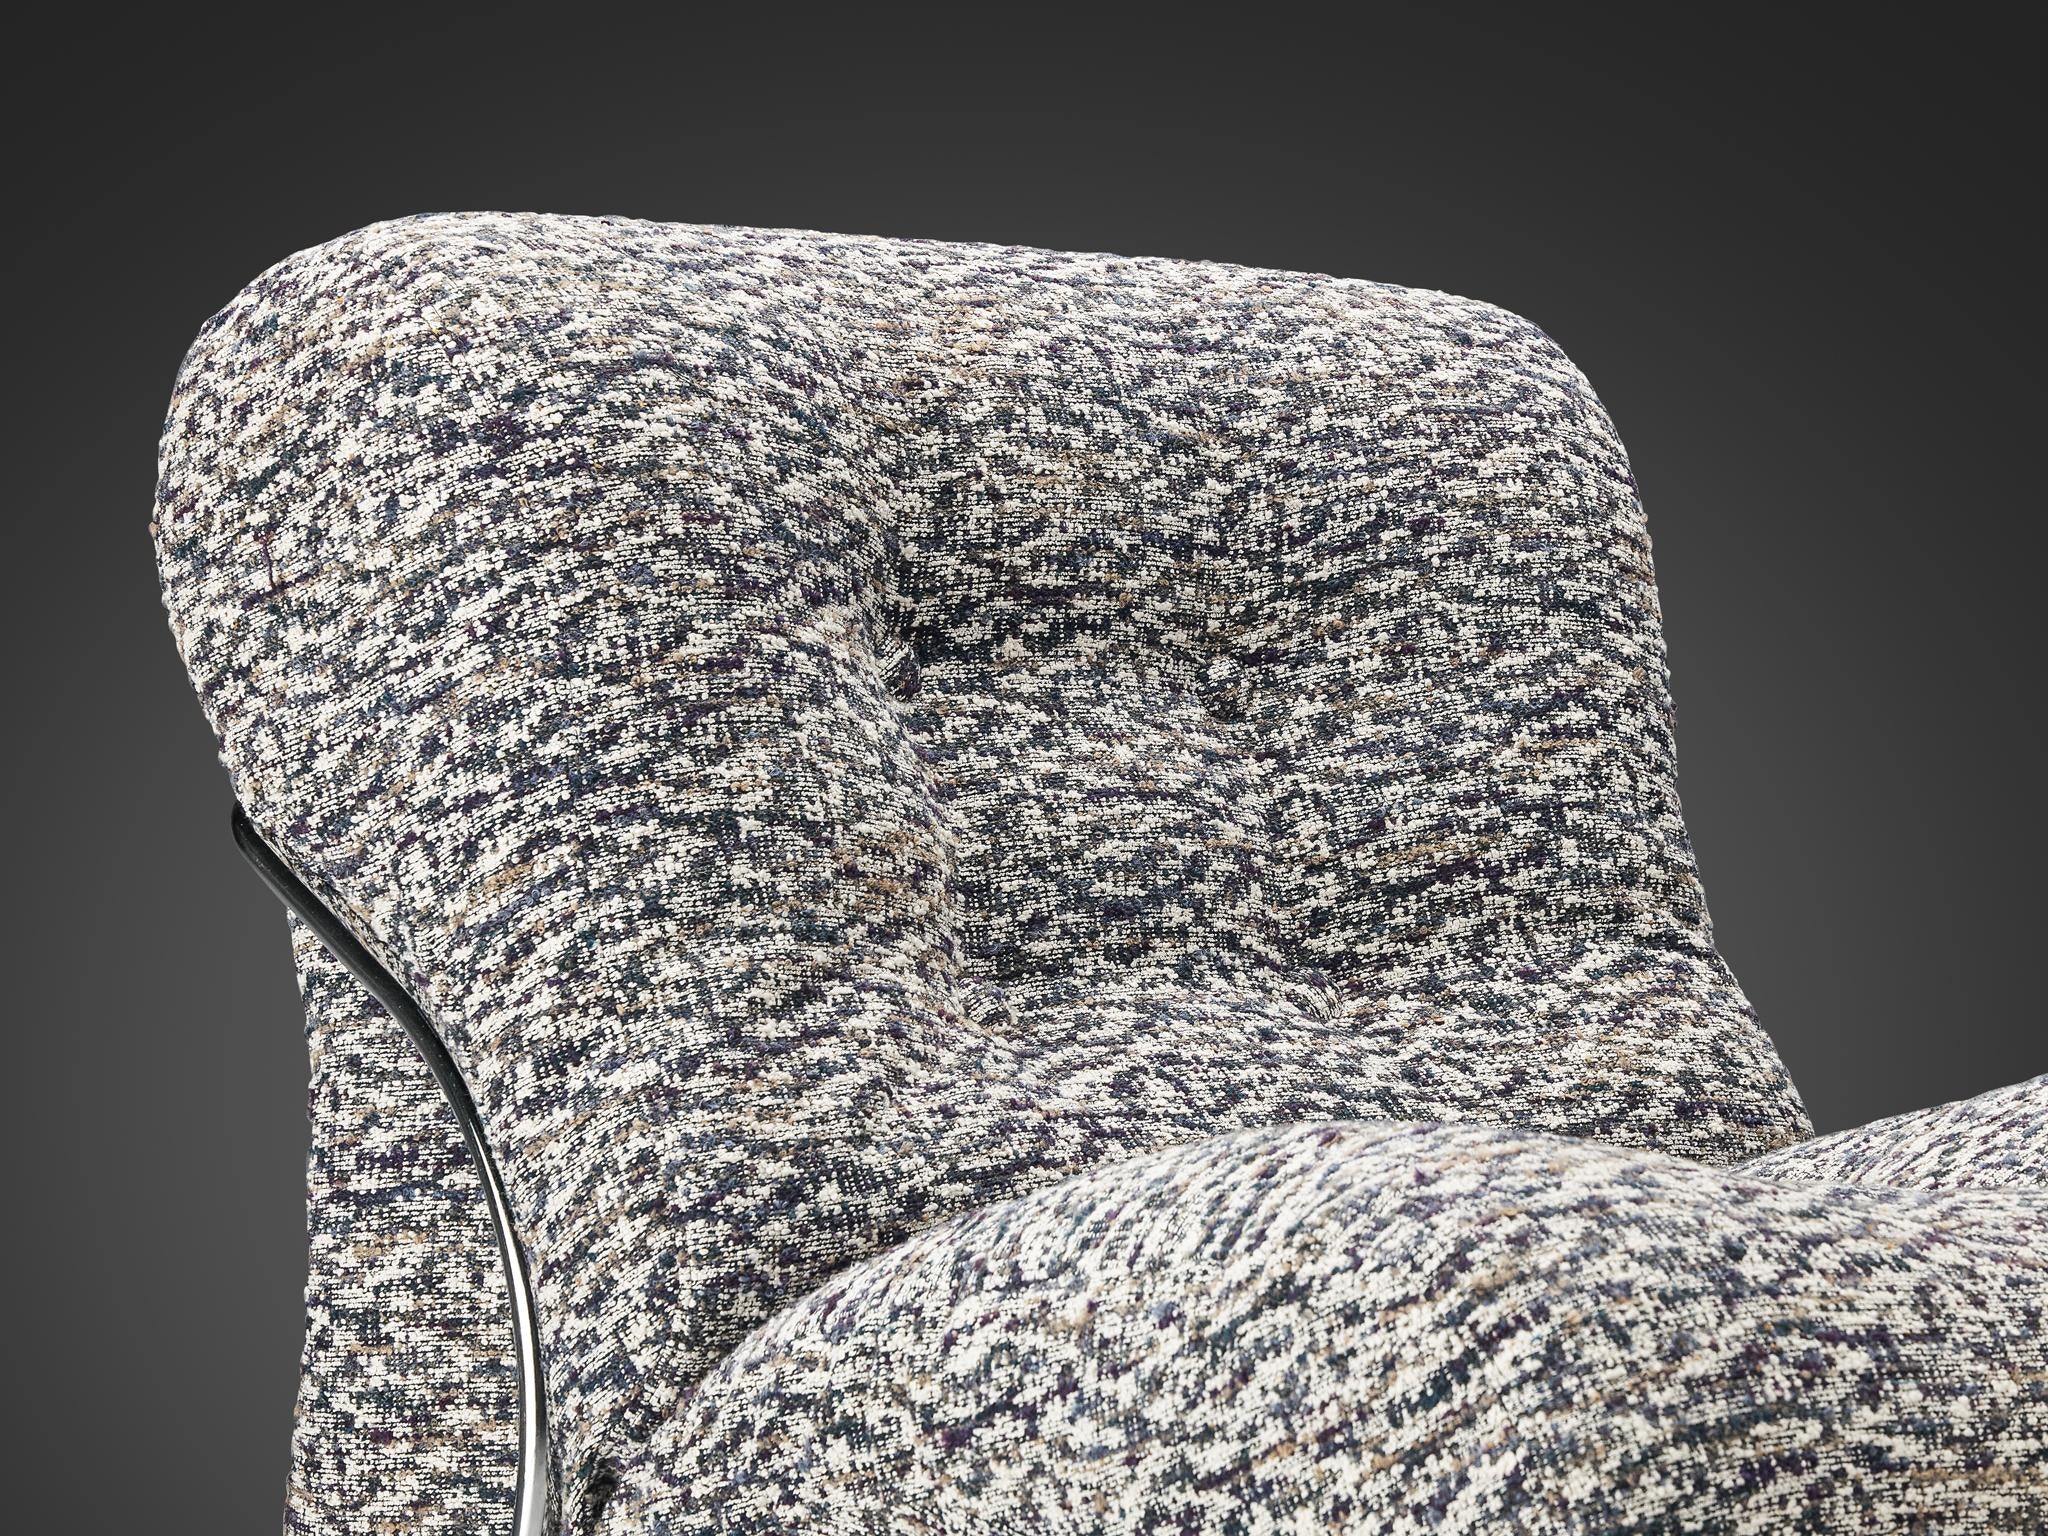 I.P.E. Pair of 'Corolla' Lounge Chairs in Patterned Upholstery